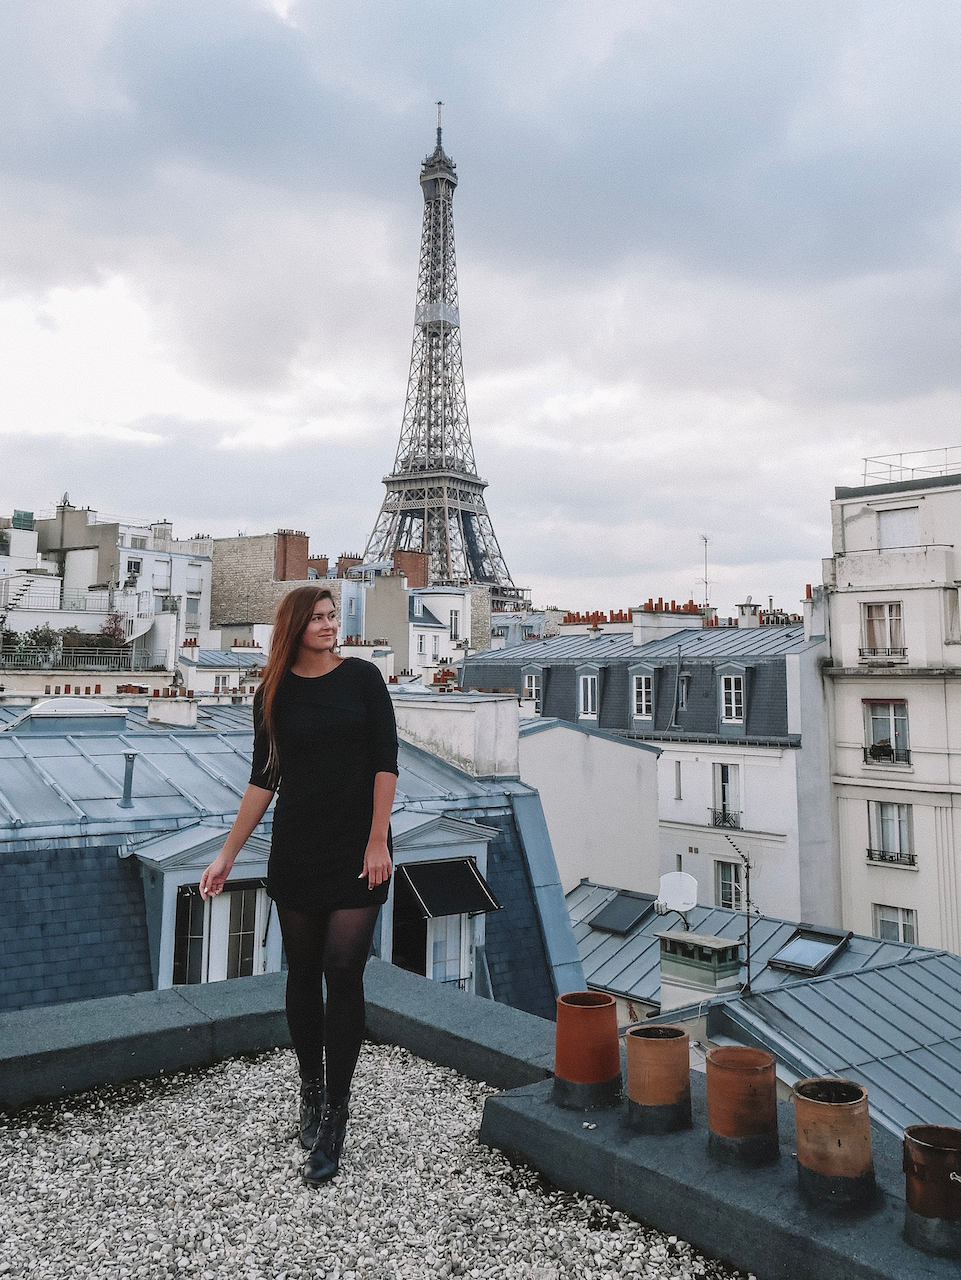 Woman on Parisian rooftop with Eiffel Tower view - Paris - France